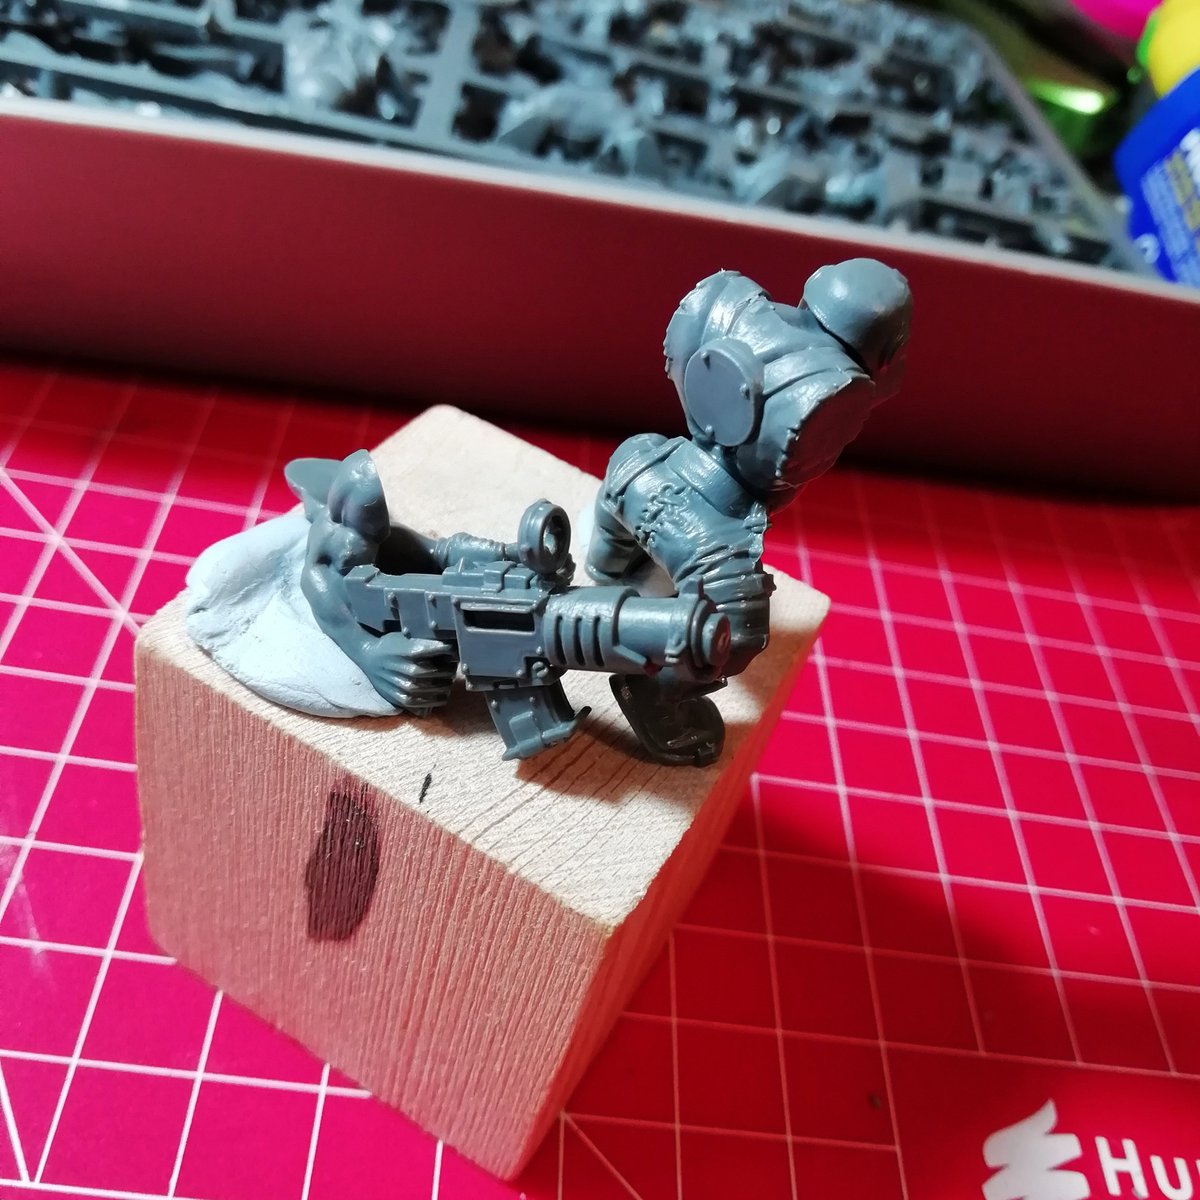 #hobbystreakday61

Learnt a good lesson whilst trying to rush build a model tonight. Always check the parts are gonna fit before gluing them!
Adding this eyepiece to the Shoota means it doesn't fit past the ork's head 🤣
Luckily there are plenty of spares!